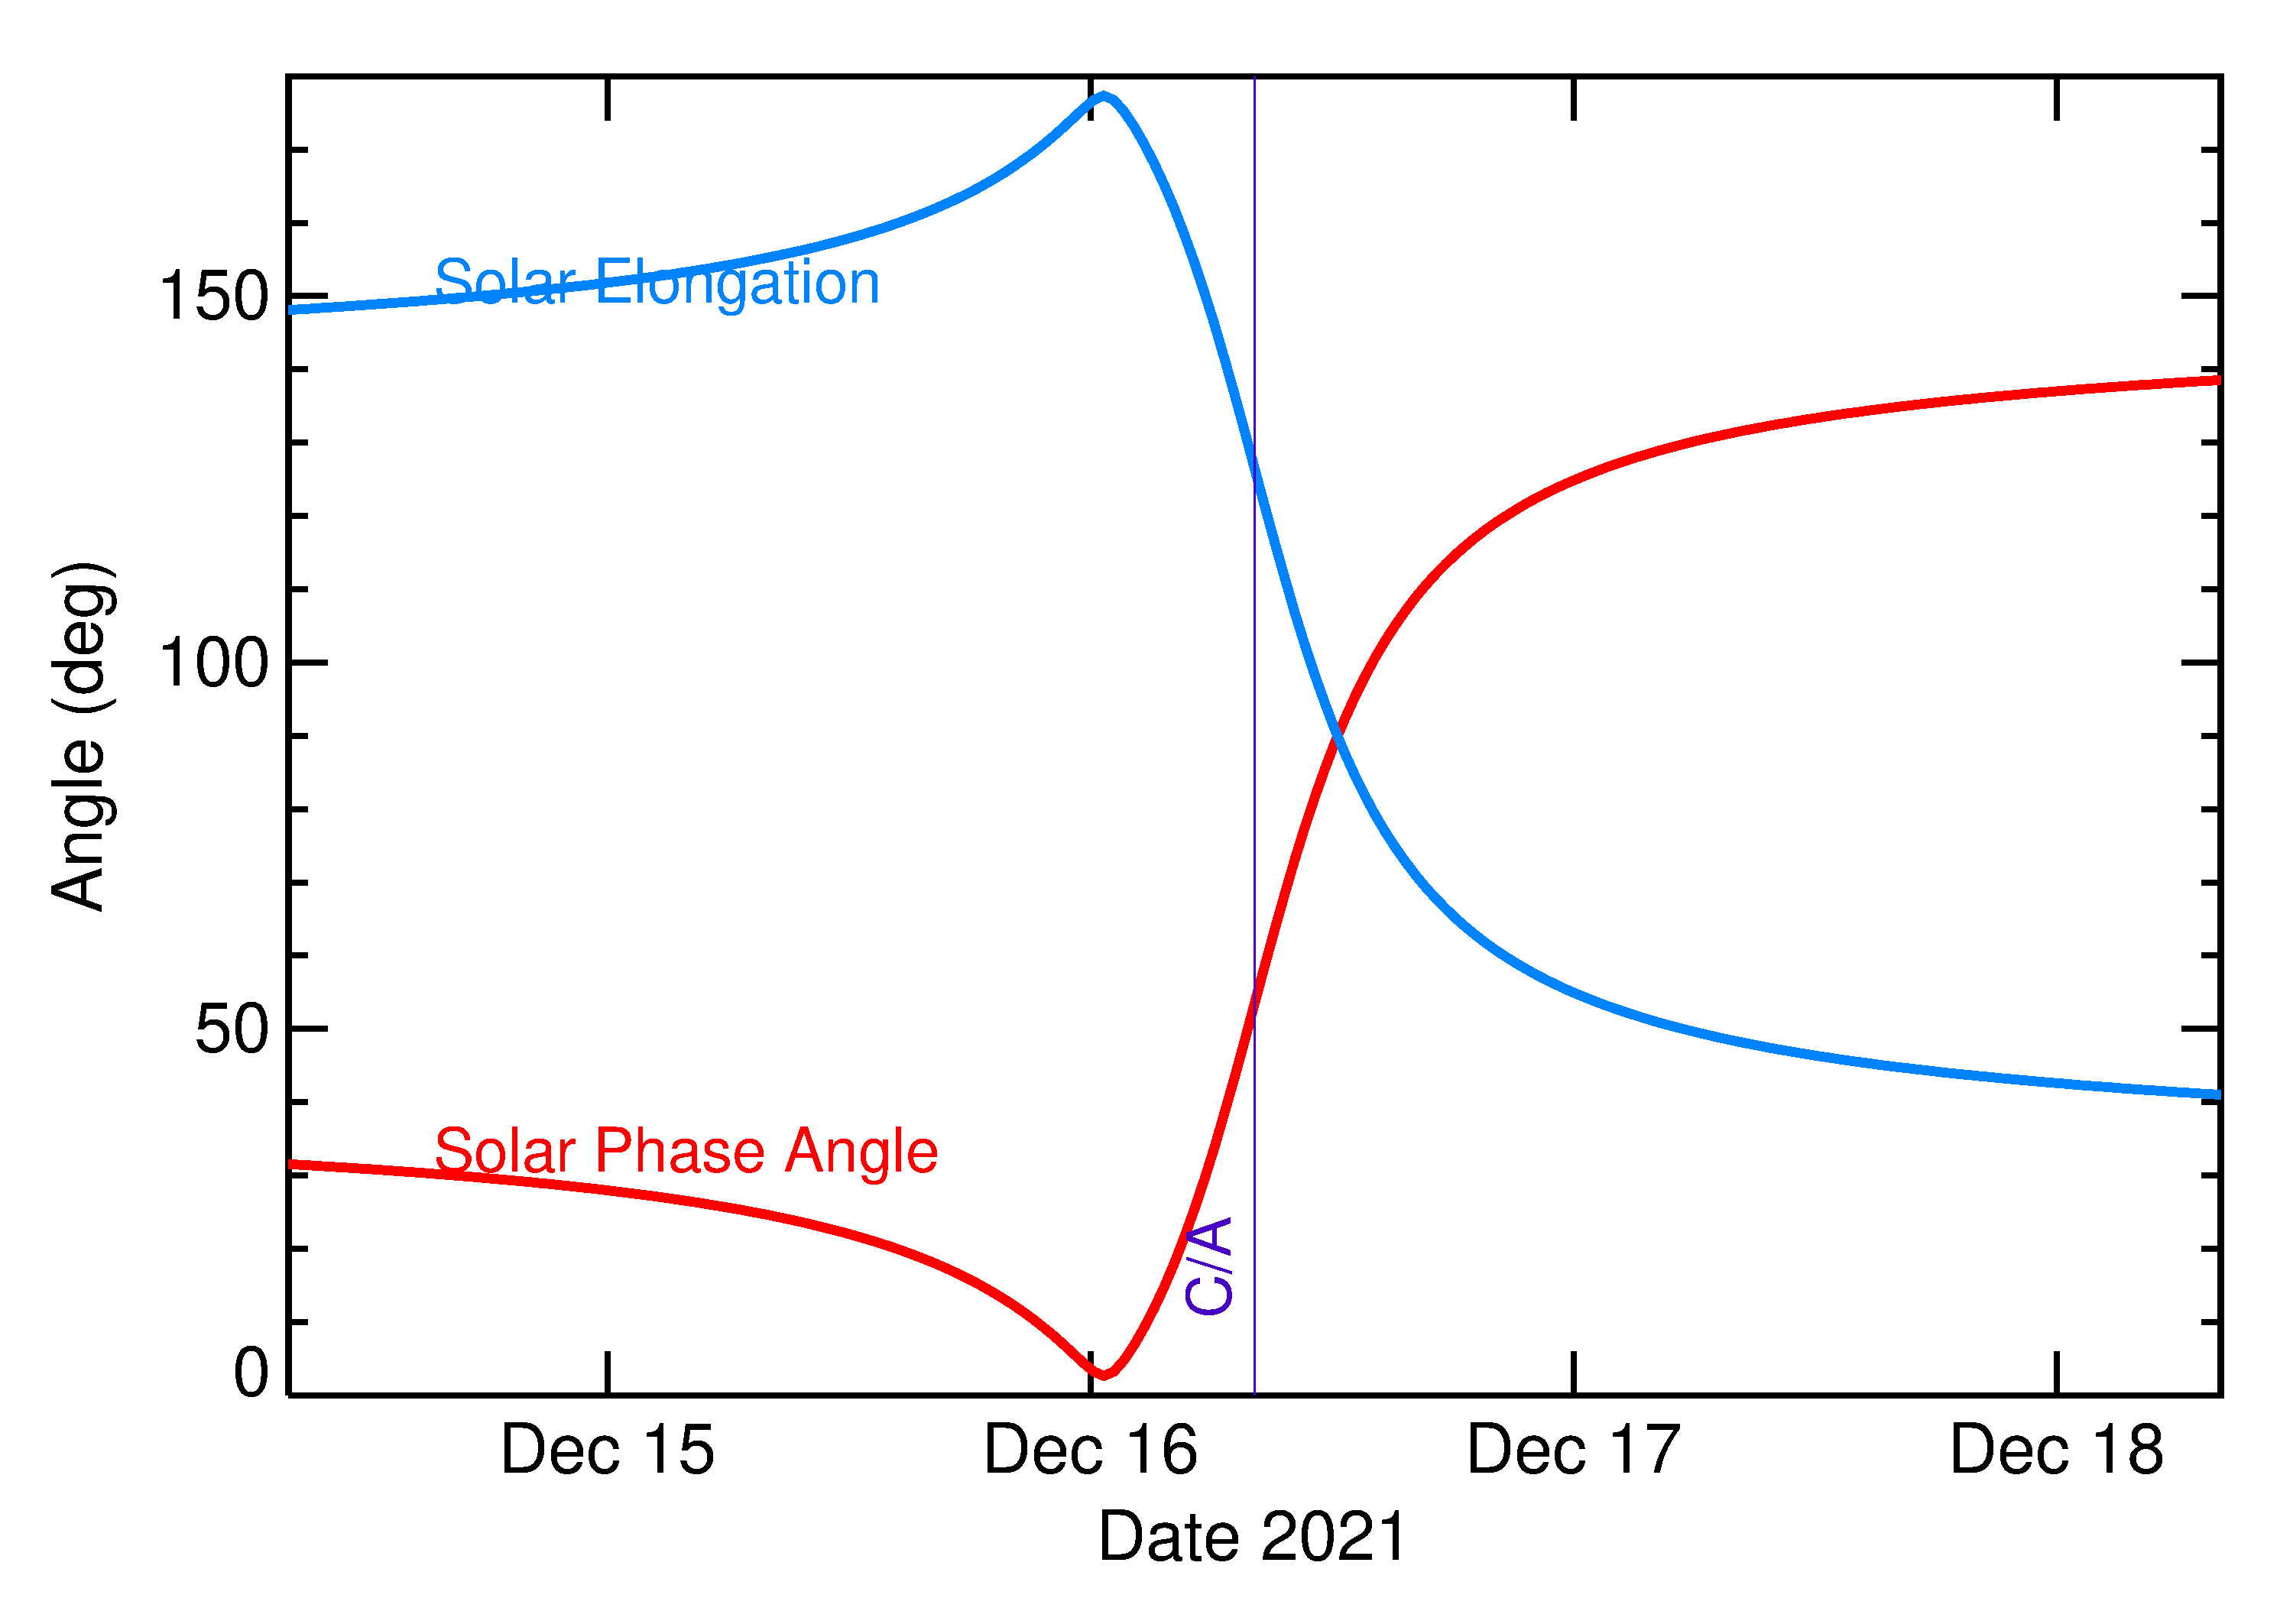 Solar Elongation and Solar Phase Angle of 2021 XC6 in the days around closest approach